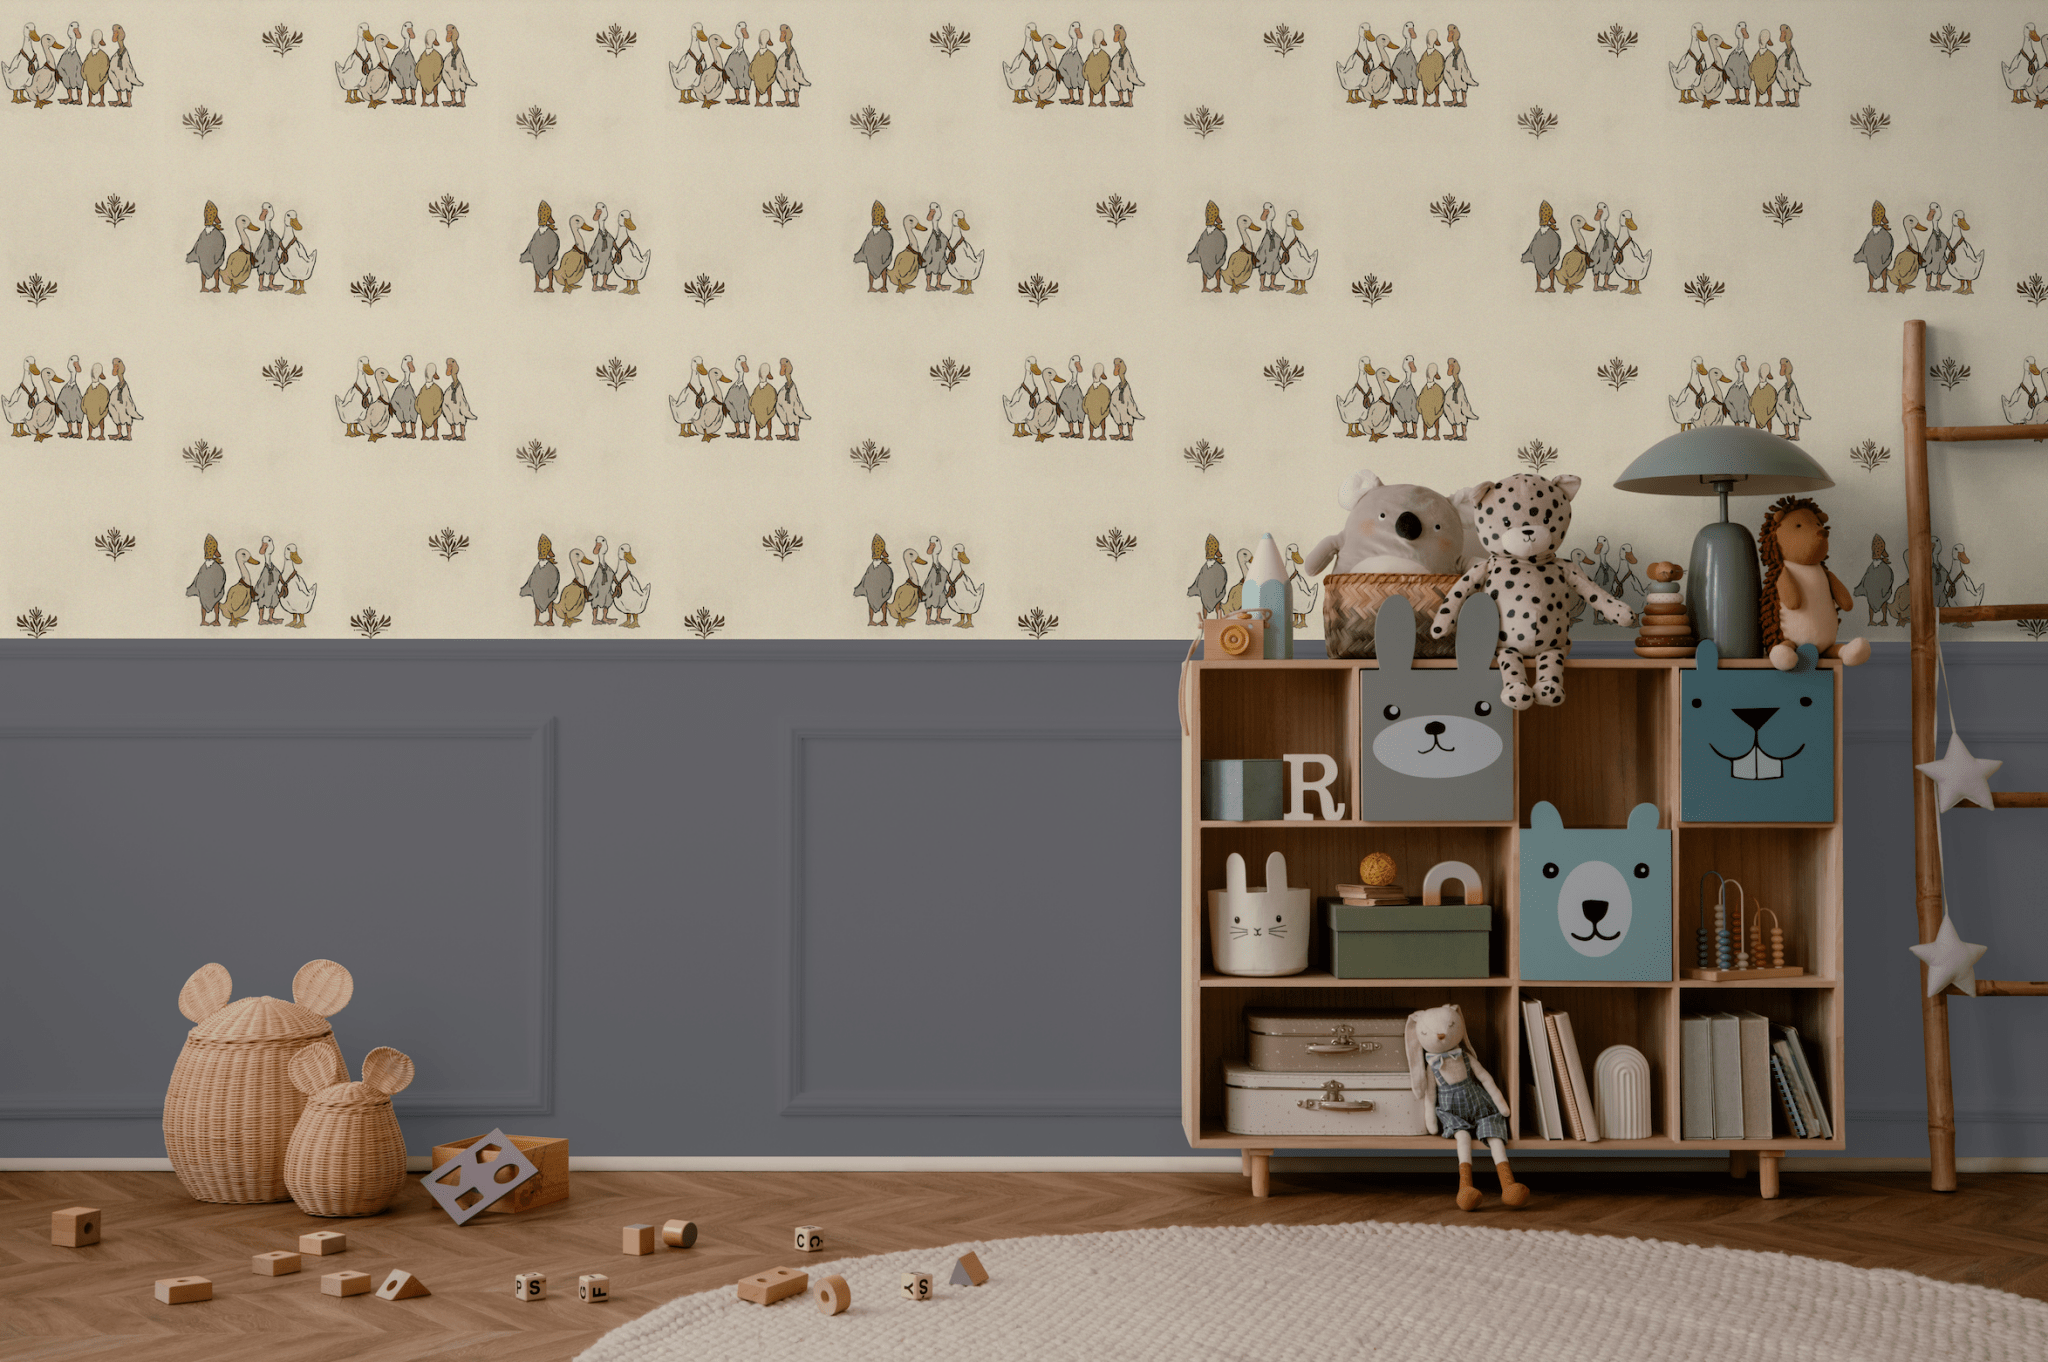 classic cute wallpaper with ducks for kids room decor, peel and stick, removable canada